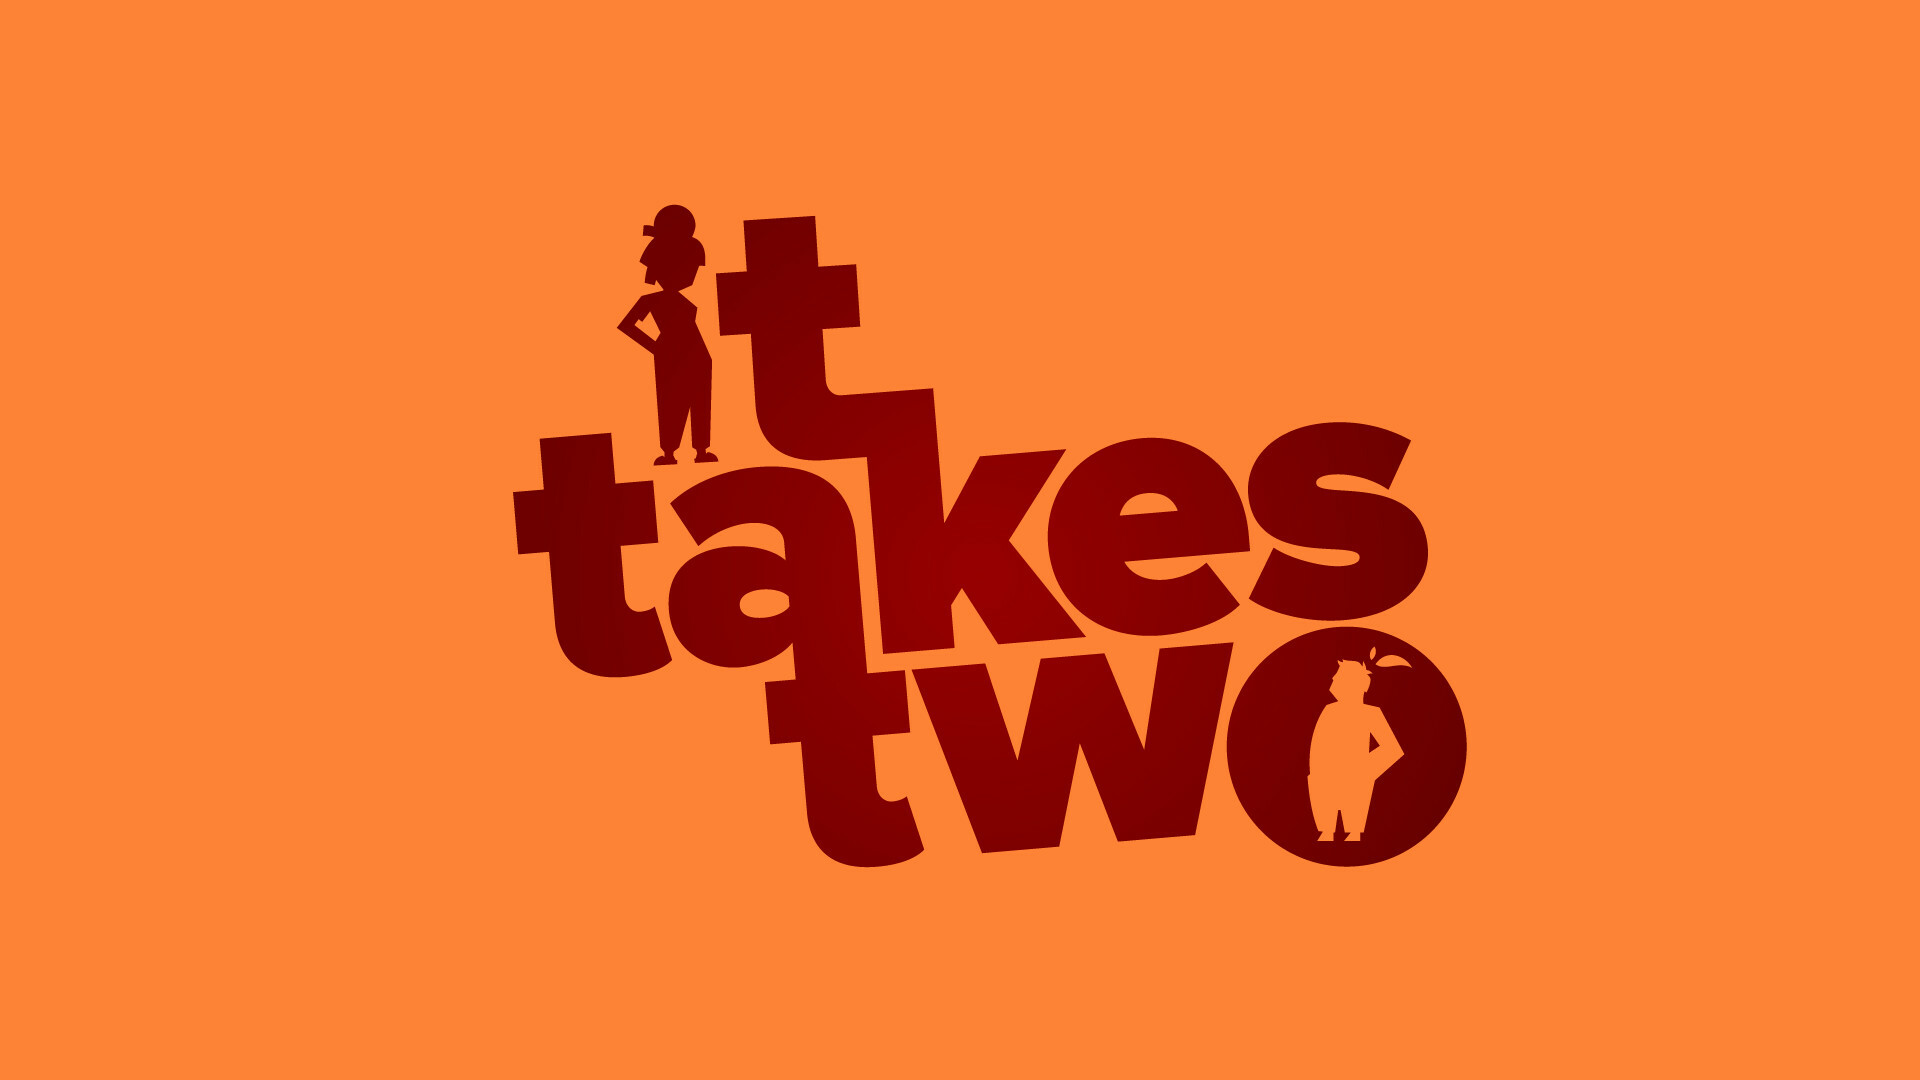 It Takes Two: A co-op action-adventure platformer that marries gameplay and narrative in innovative and unexpected ways. 1920x1080 Full HD Wallpaper.